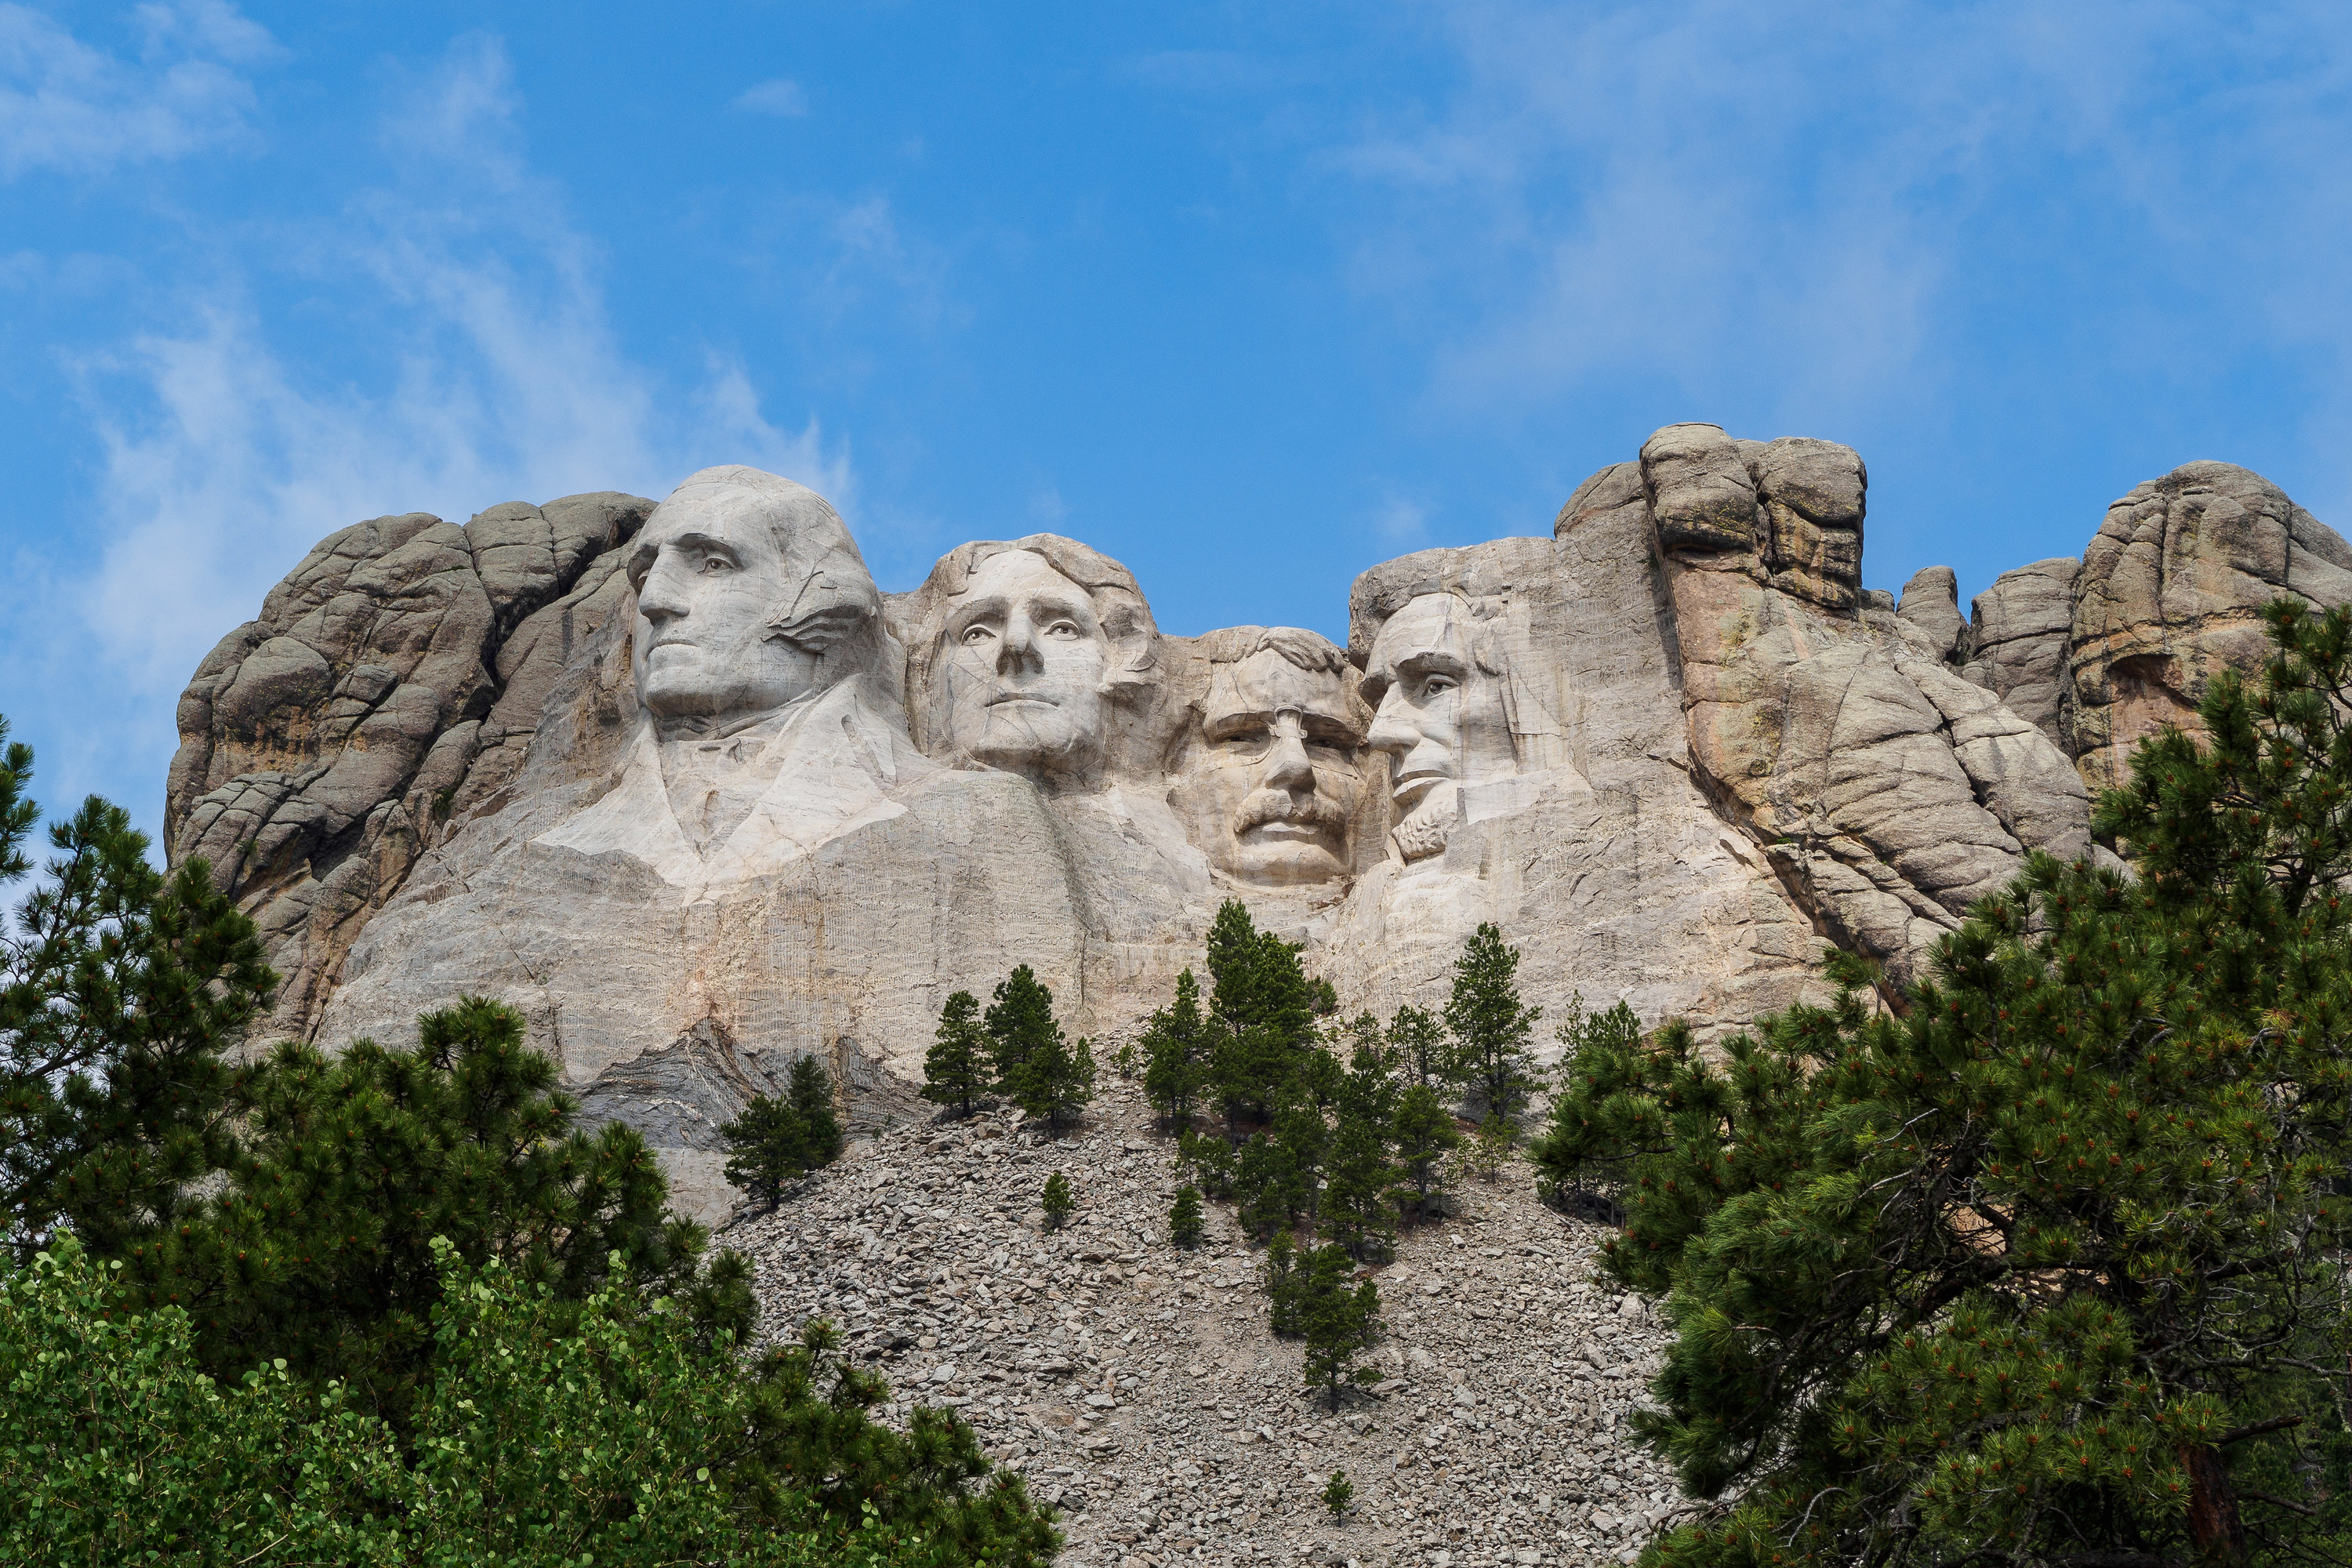 Mount Rushmore under a blue sky